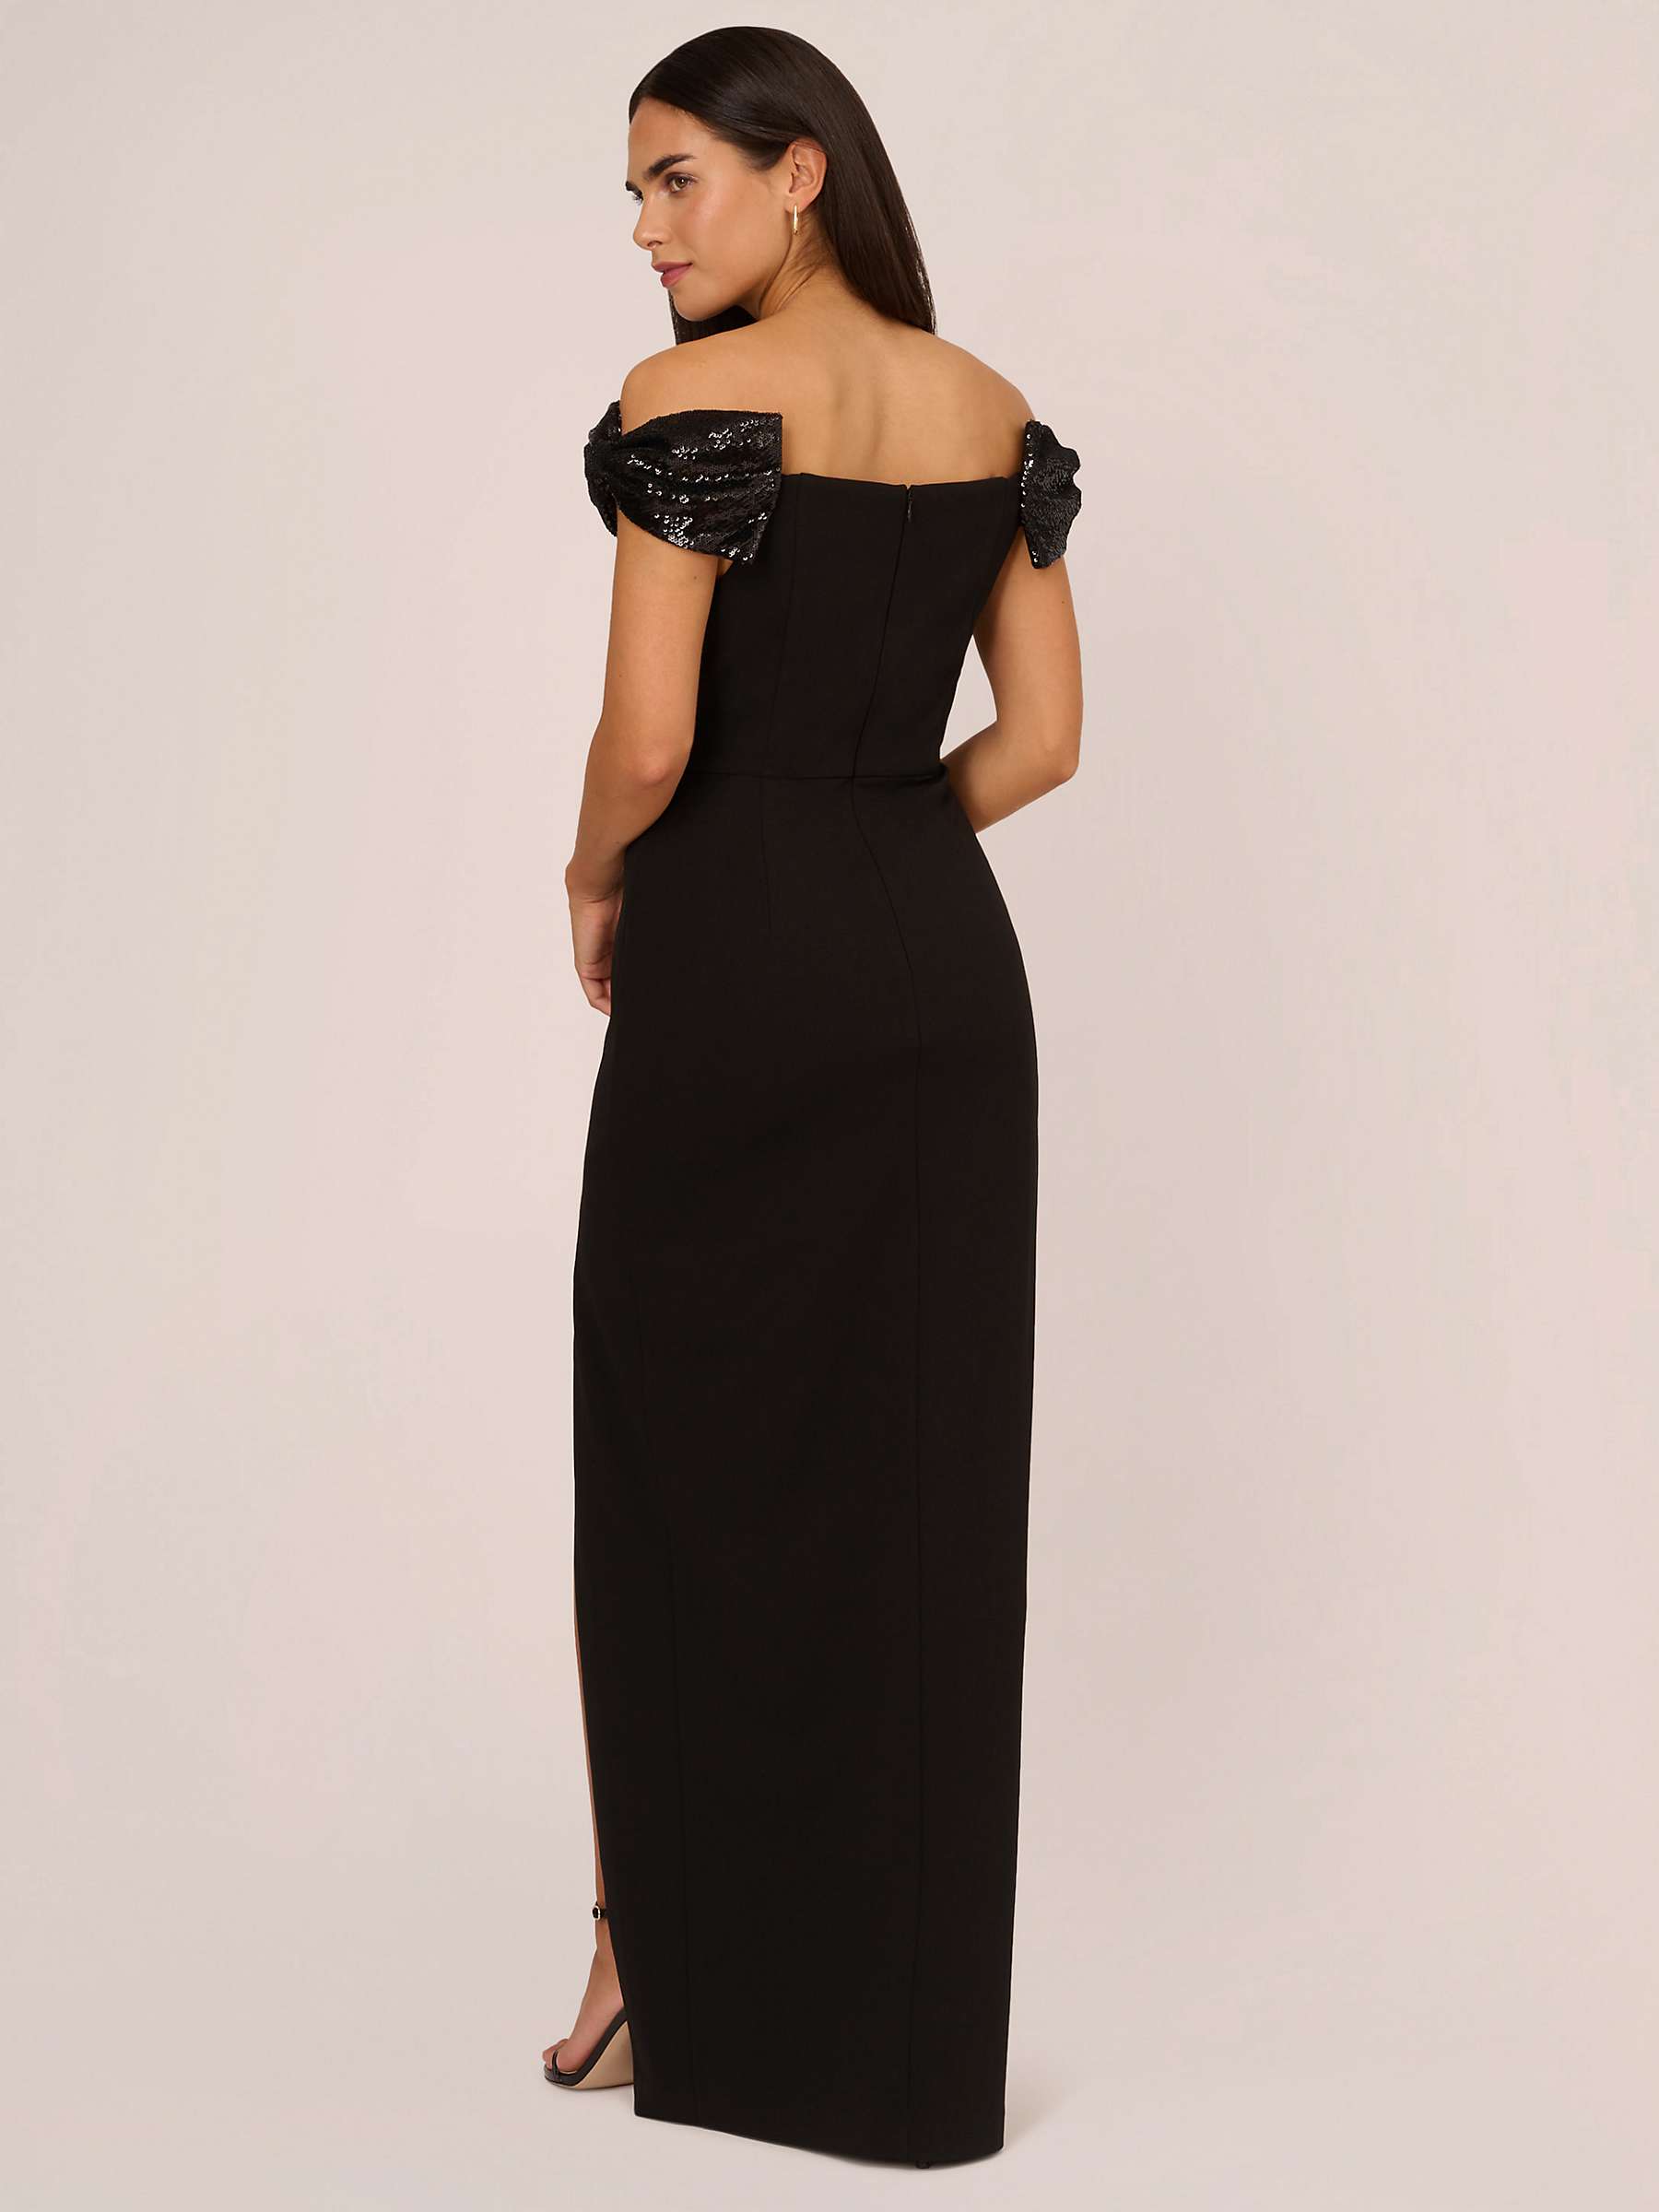 Buy Aidan by Adrianna Papell Stretch Knit Crepe Maxi Dress, Black Online at johnlewis.com